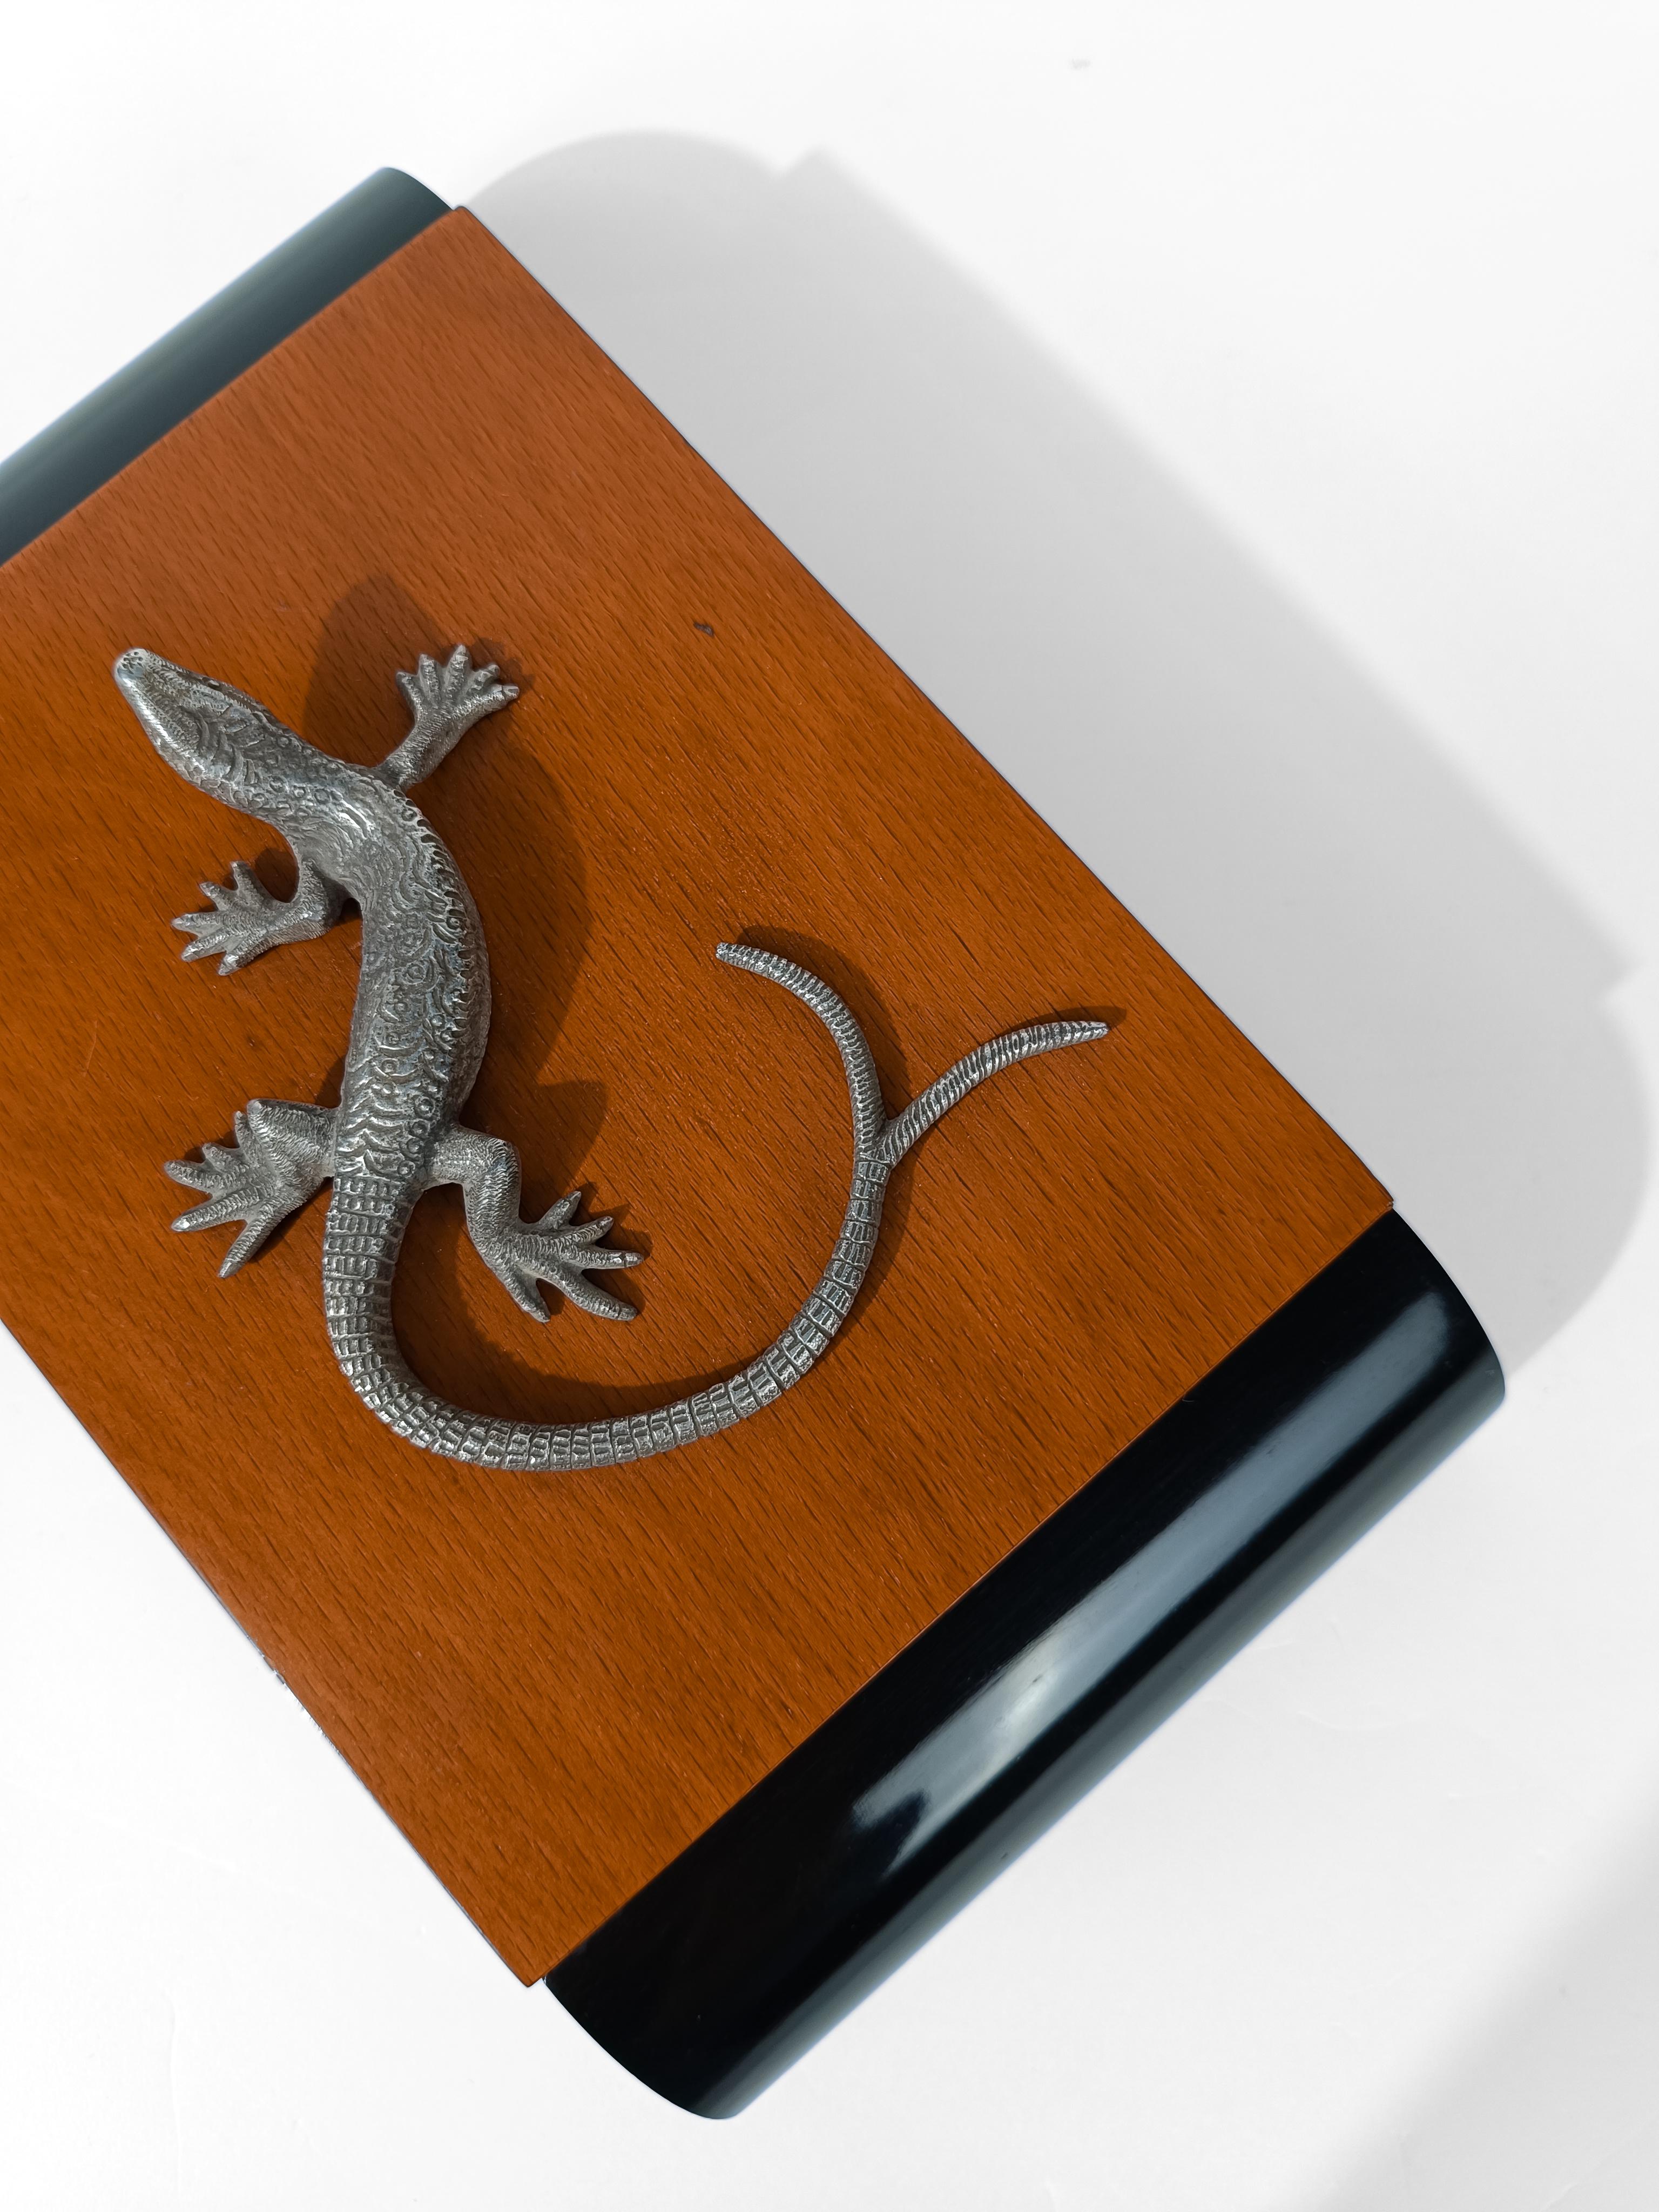 Art Deco wooden Box decorated with a Silver Tone Metal Lizard-shaped Handle For Sale 1